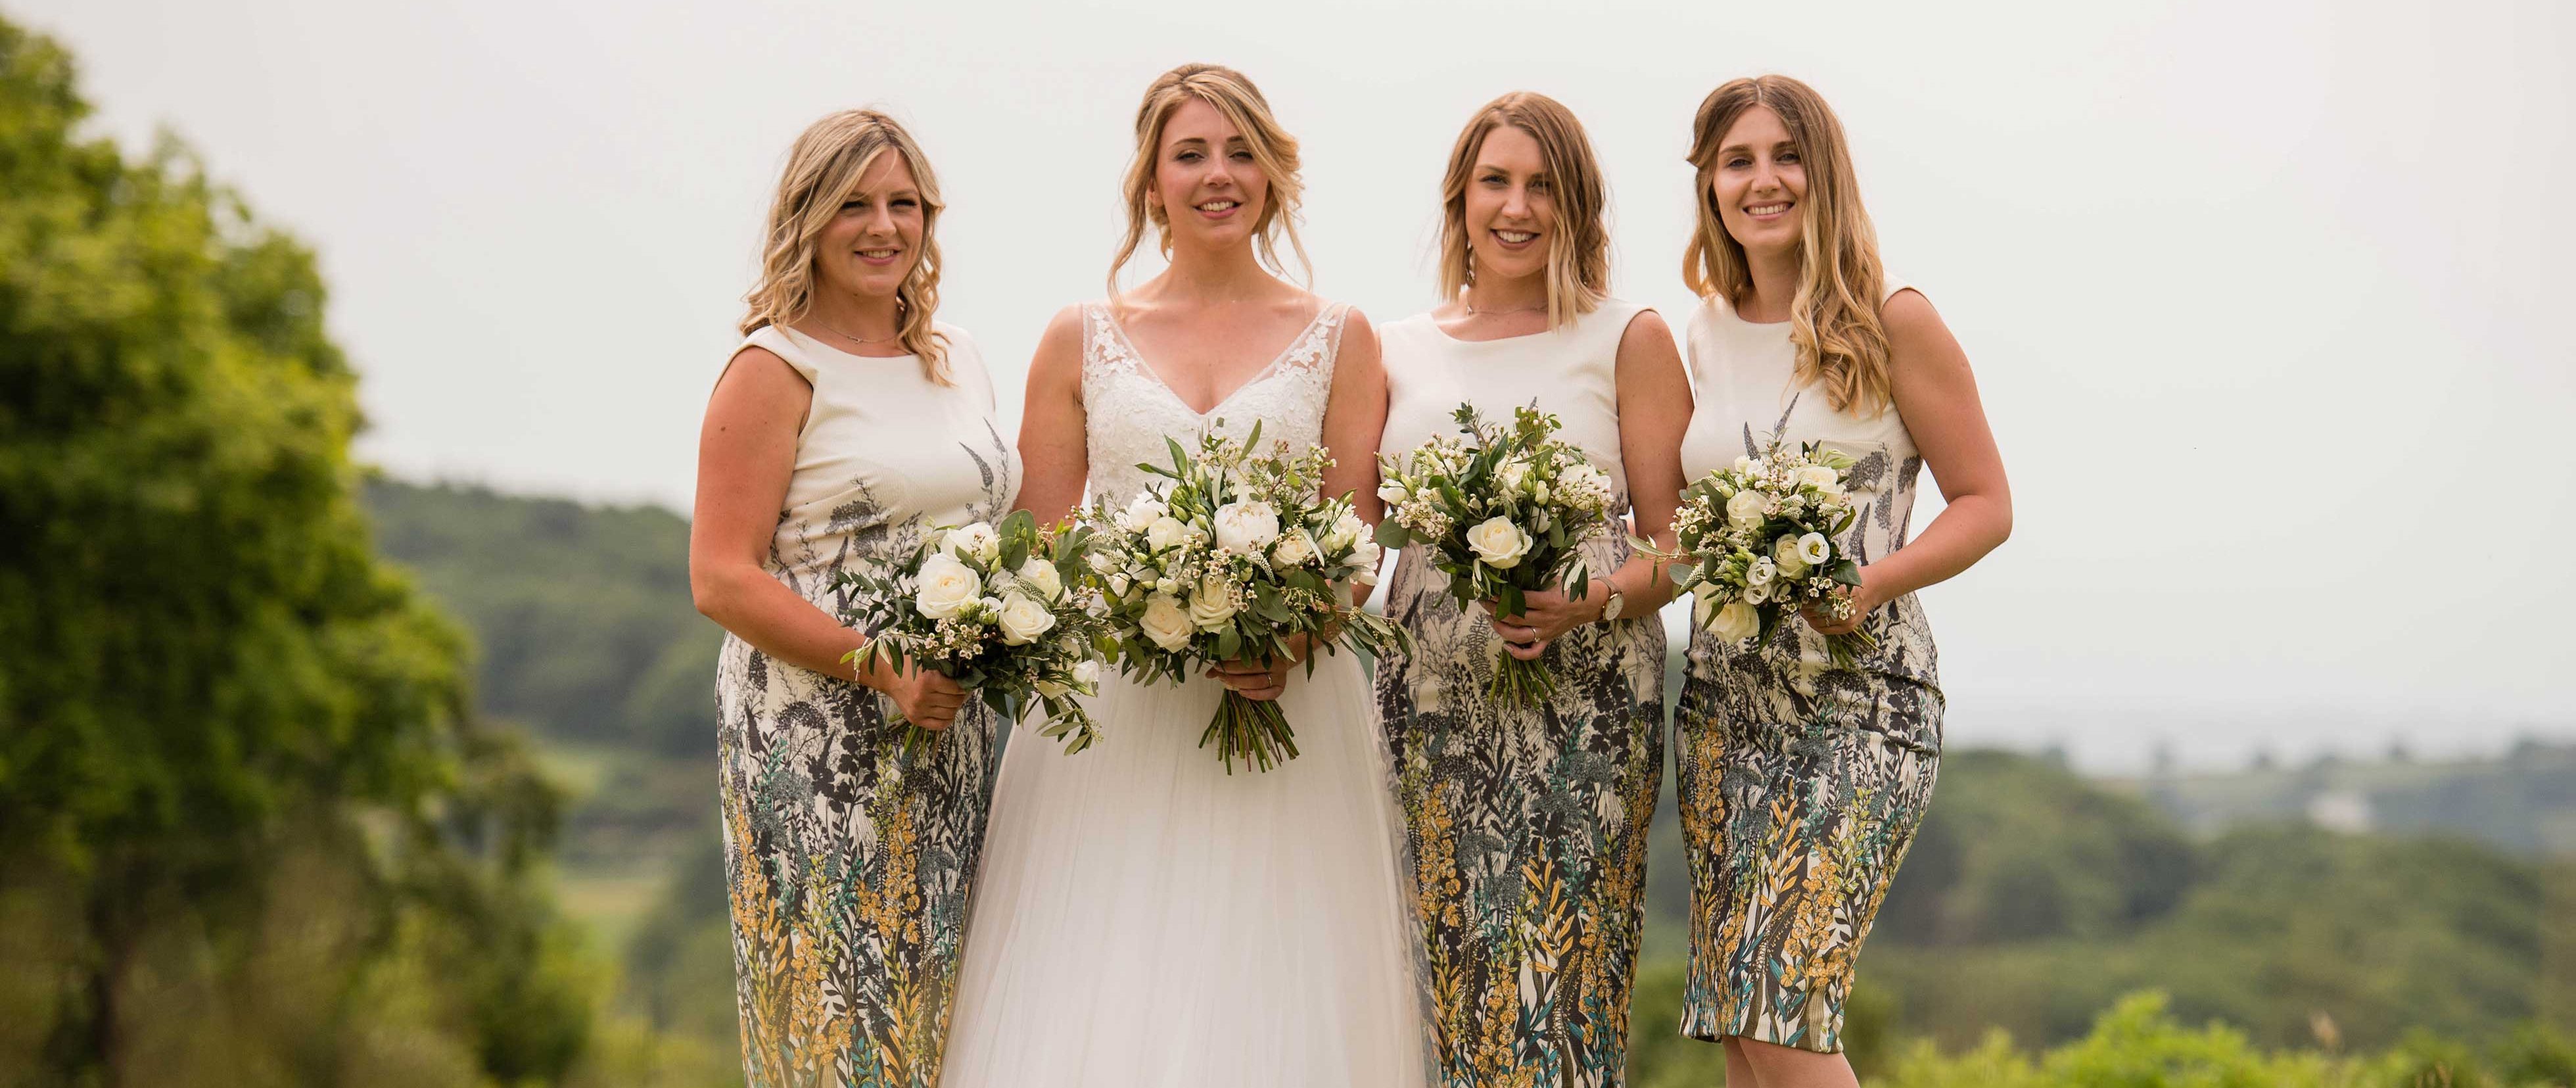 Bride and bridesmaid standing together with bouquets